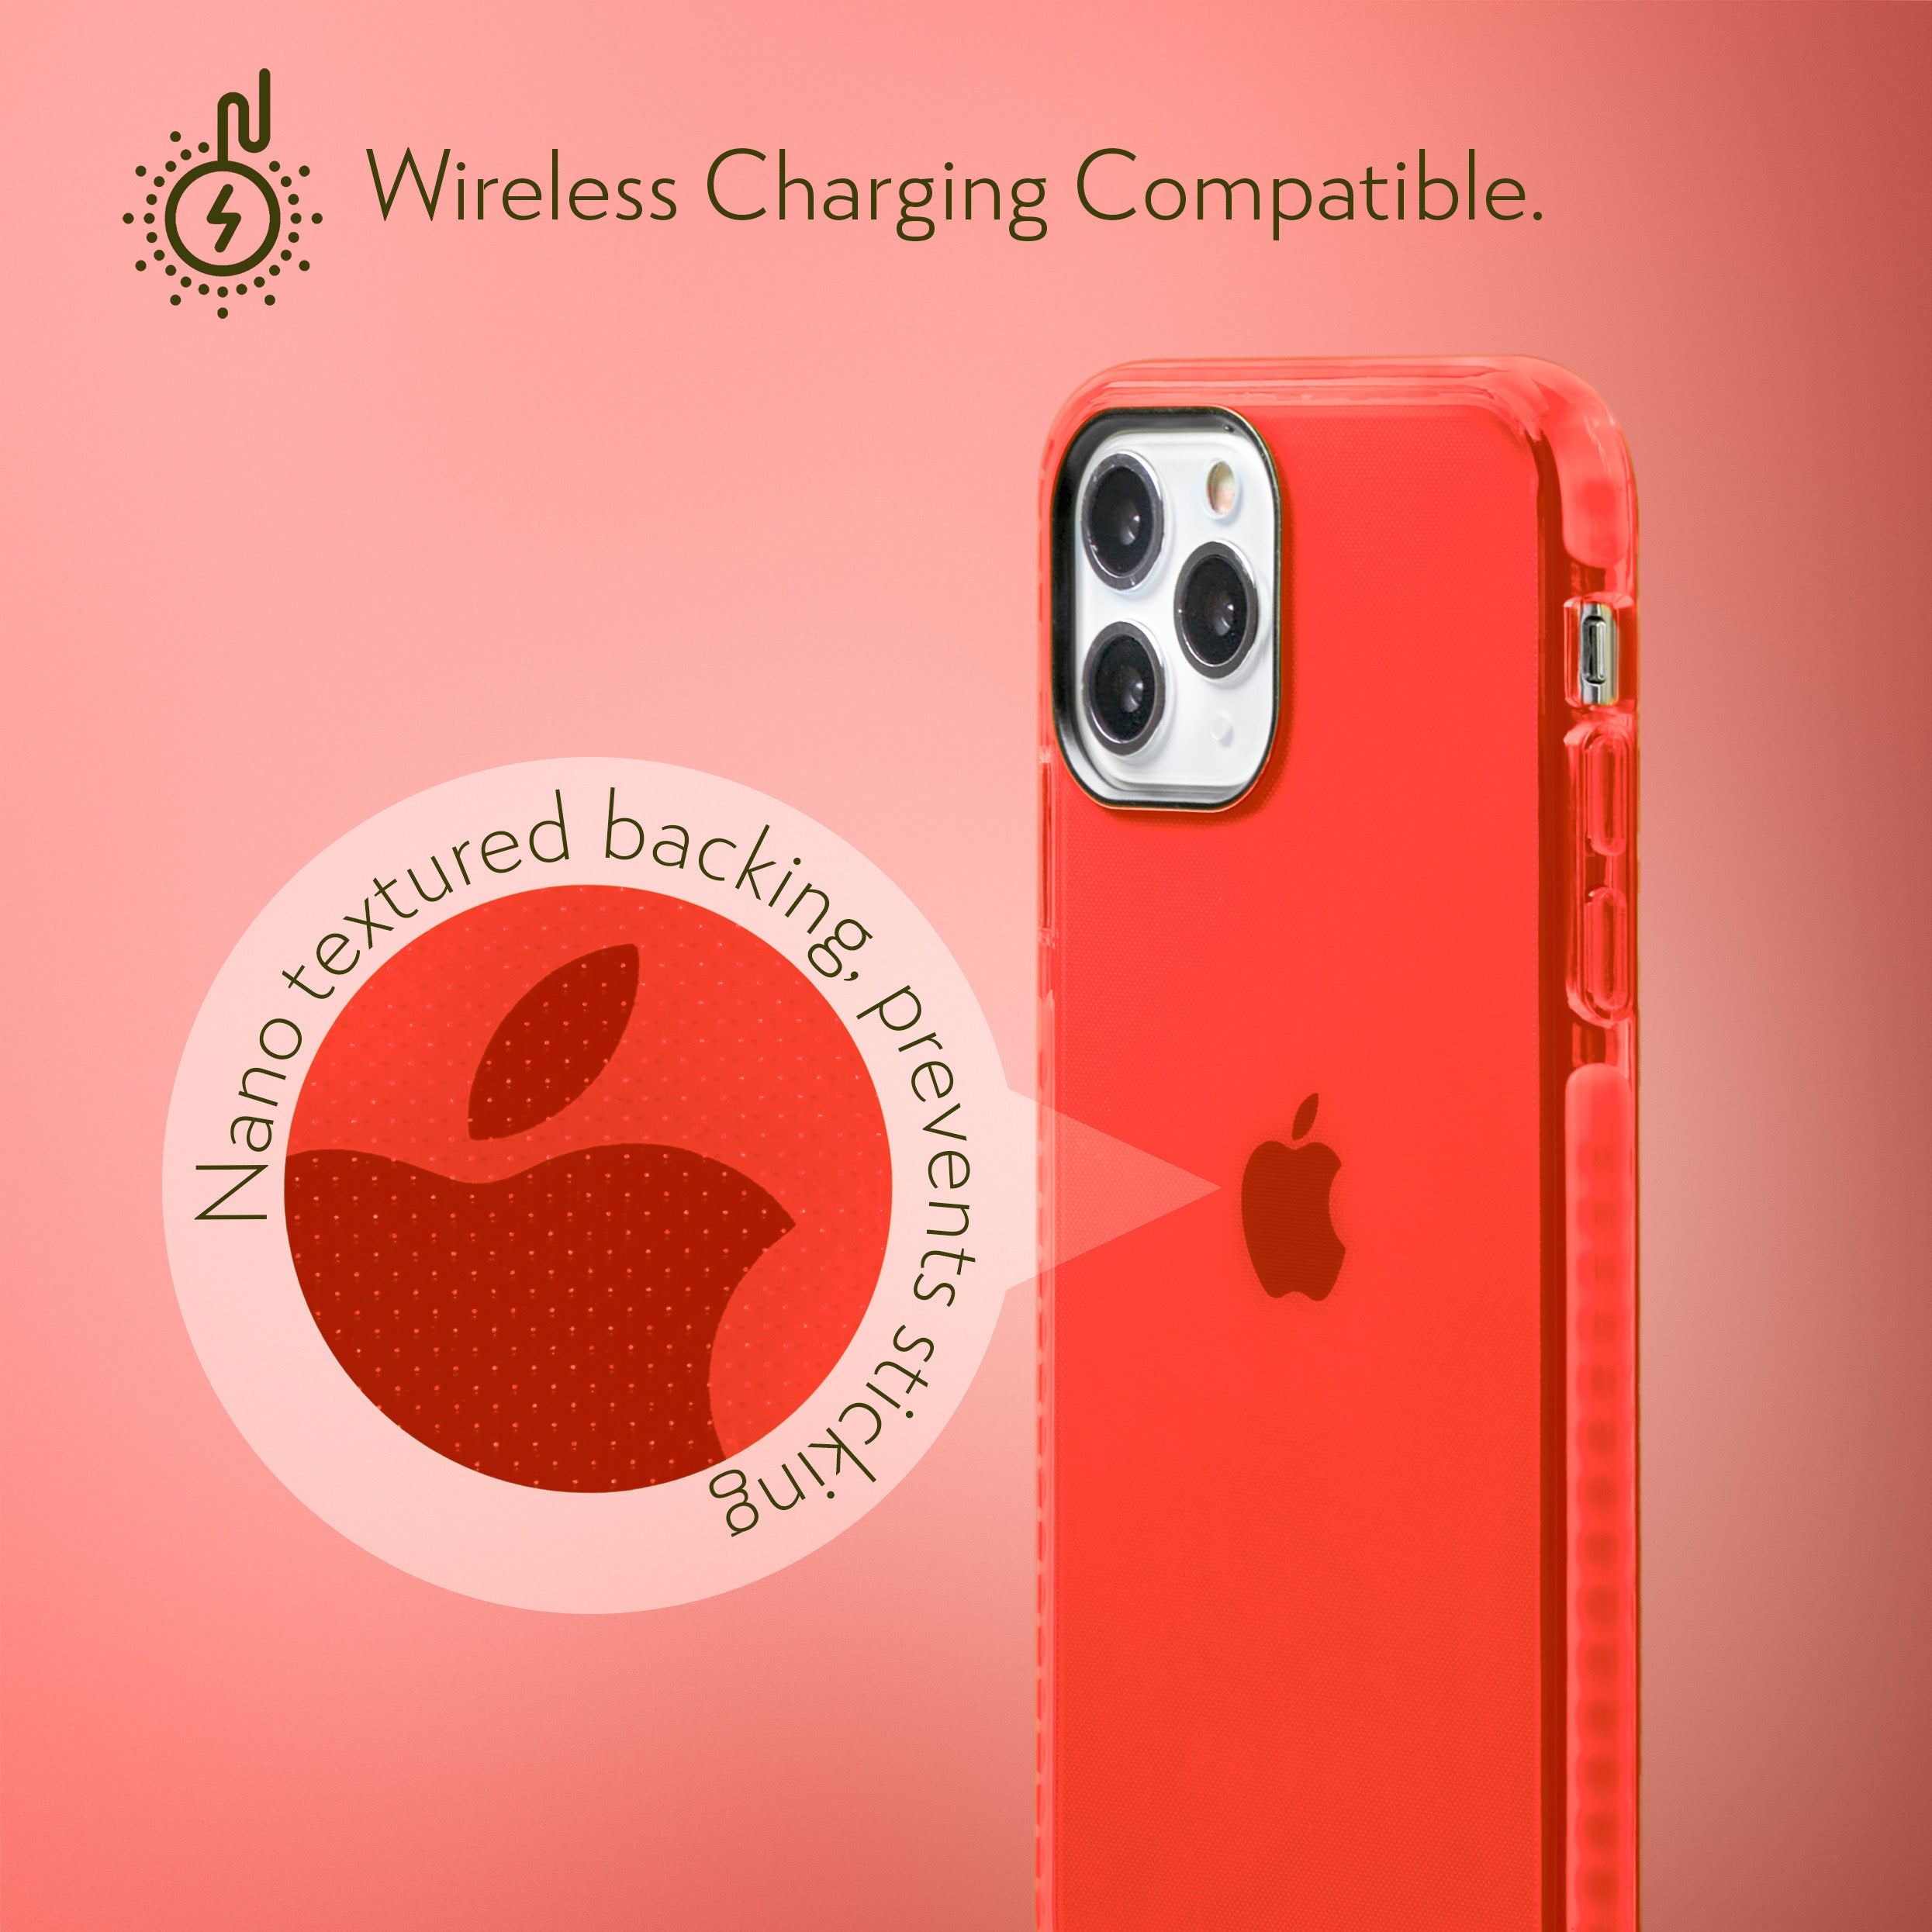 Barrier Case for iPhone 11 Pro - Electric Red Strawberry